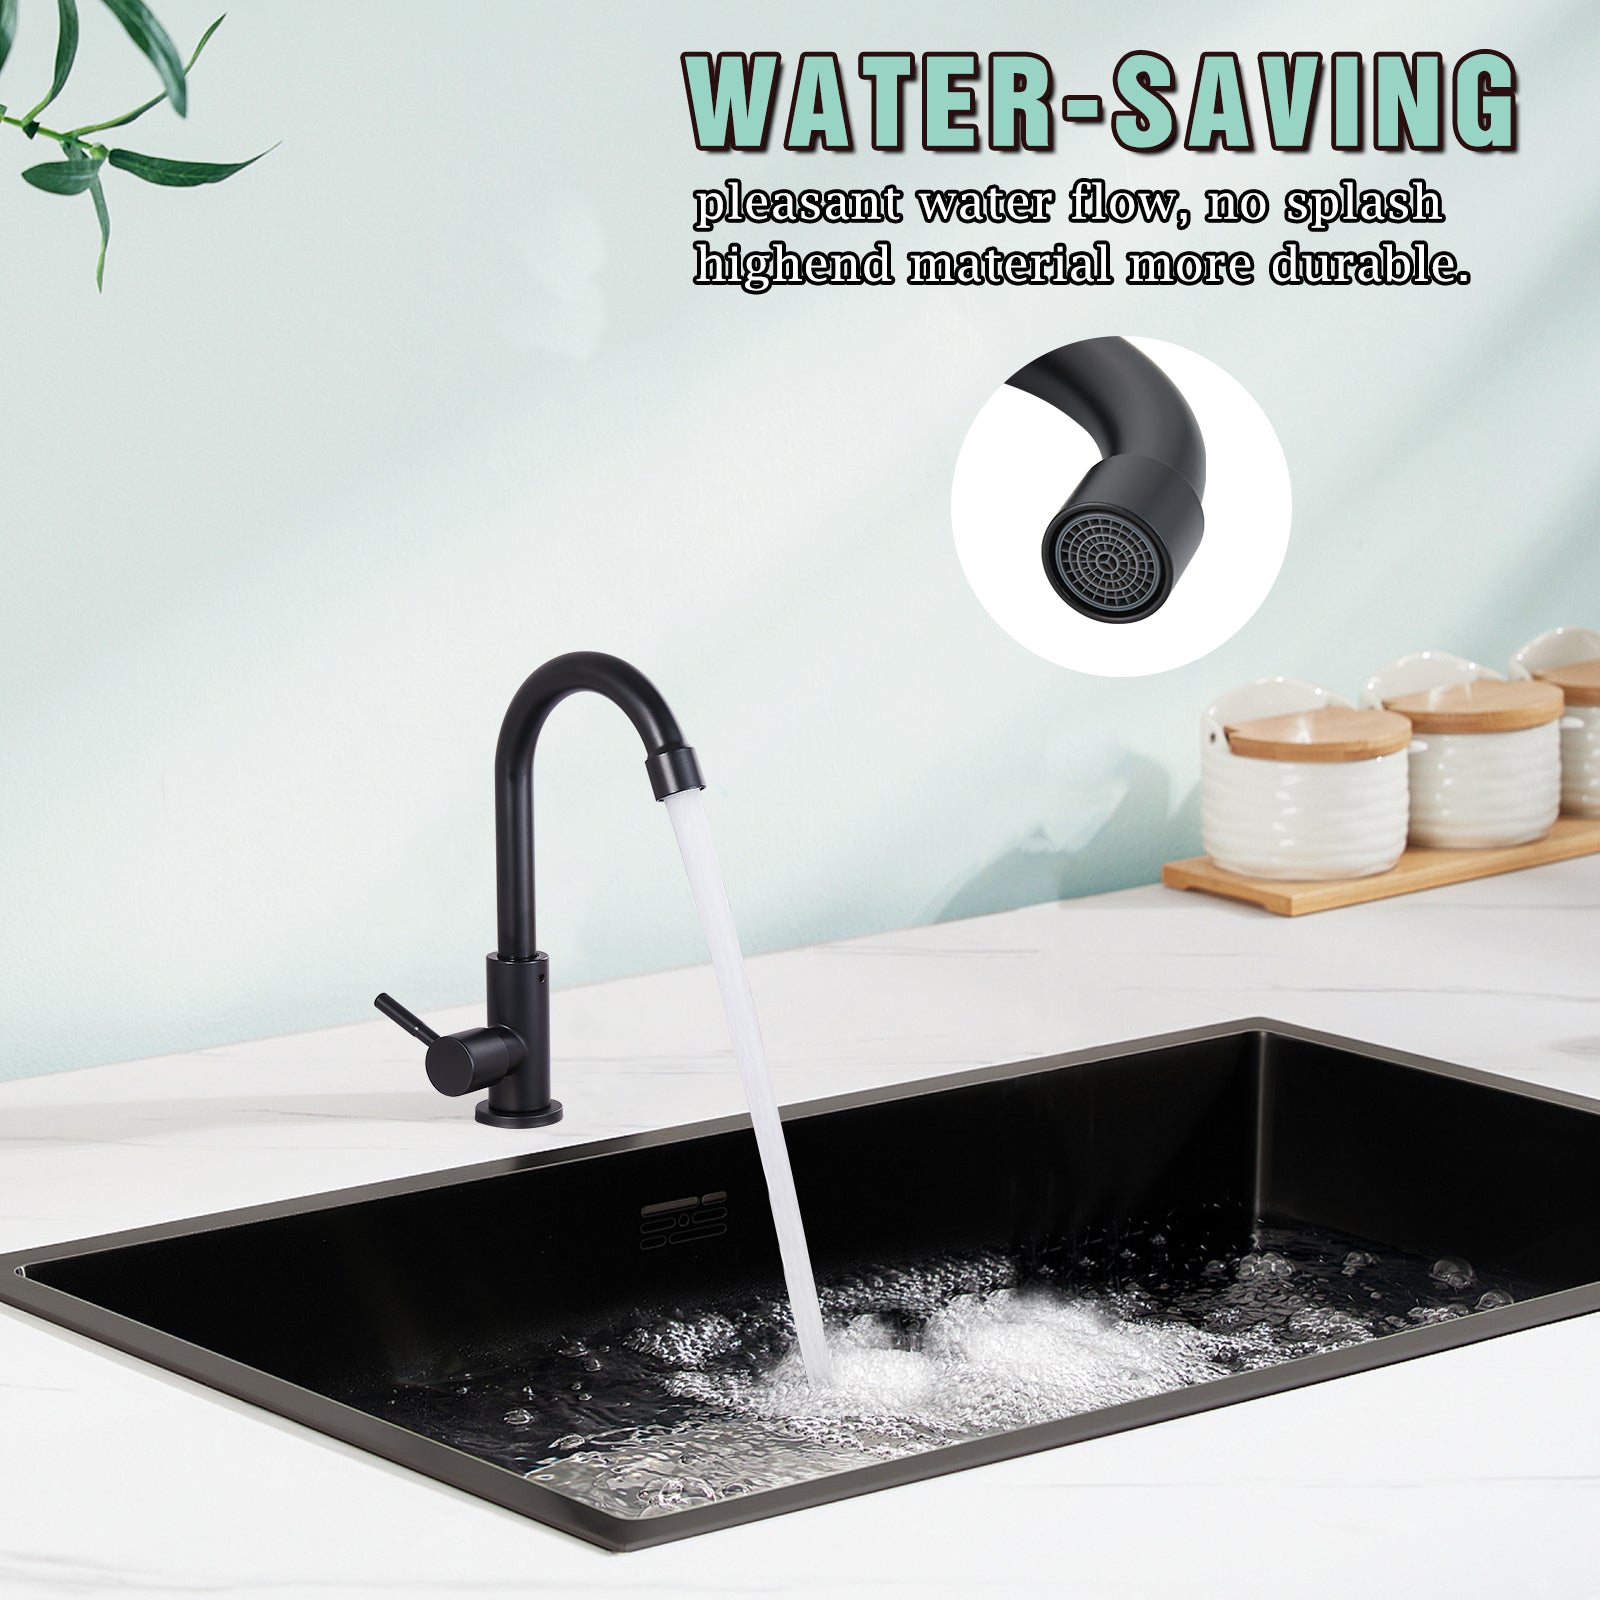 Cold Water Only Kitchen Faucet Single Handle 1 Hole Deck Mount 360 Degree Swivel Spout High Arc SUS304 Stainless Steel Sink Bar Tap Goose Neck with Hose(Drain Not Included)